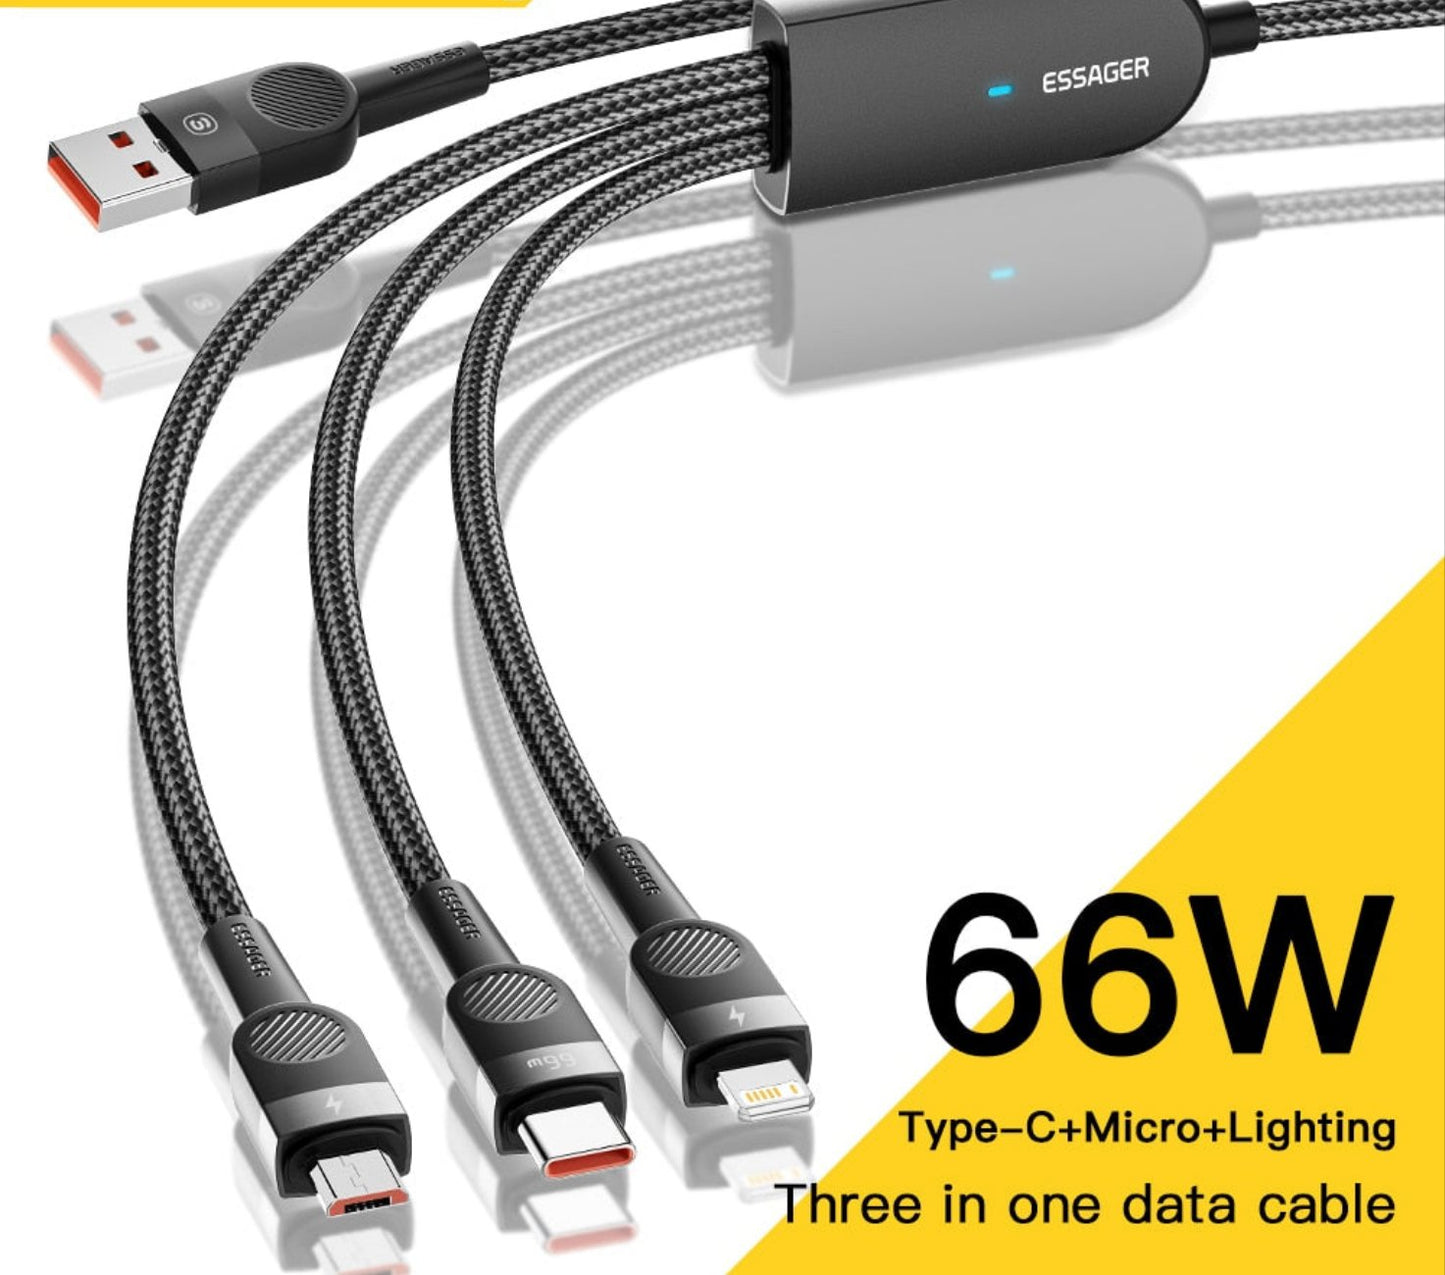 6A 66W 3 in 1 USB C Cable